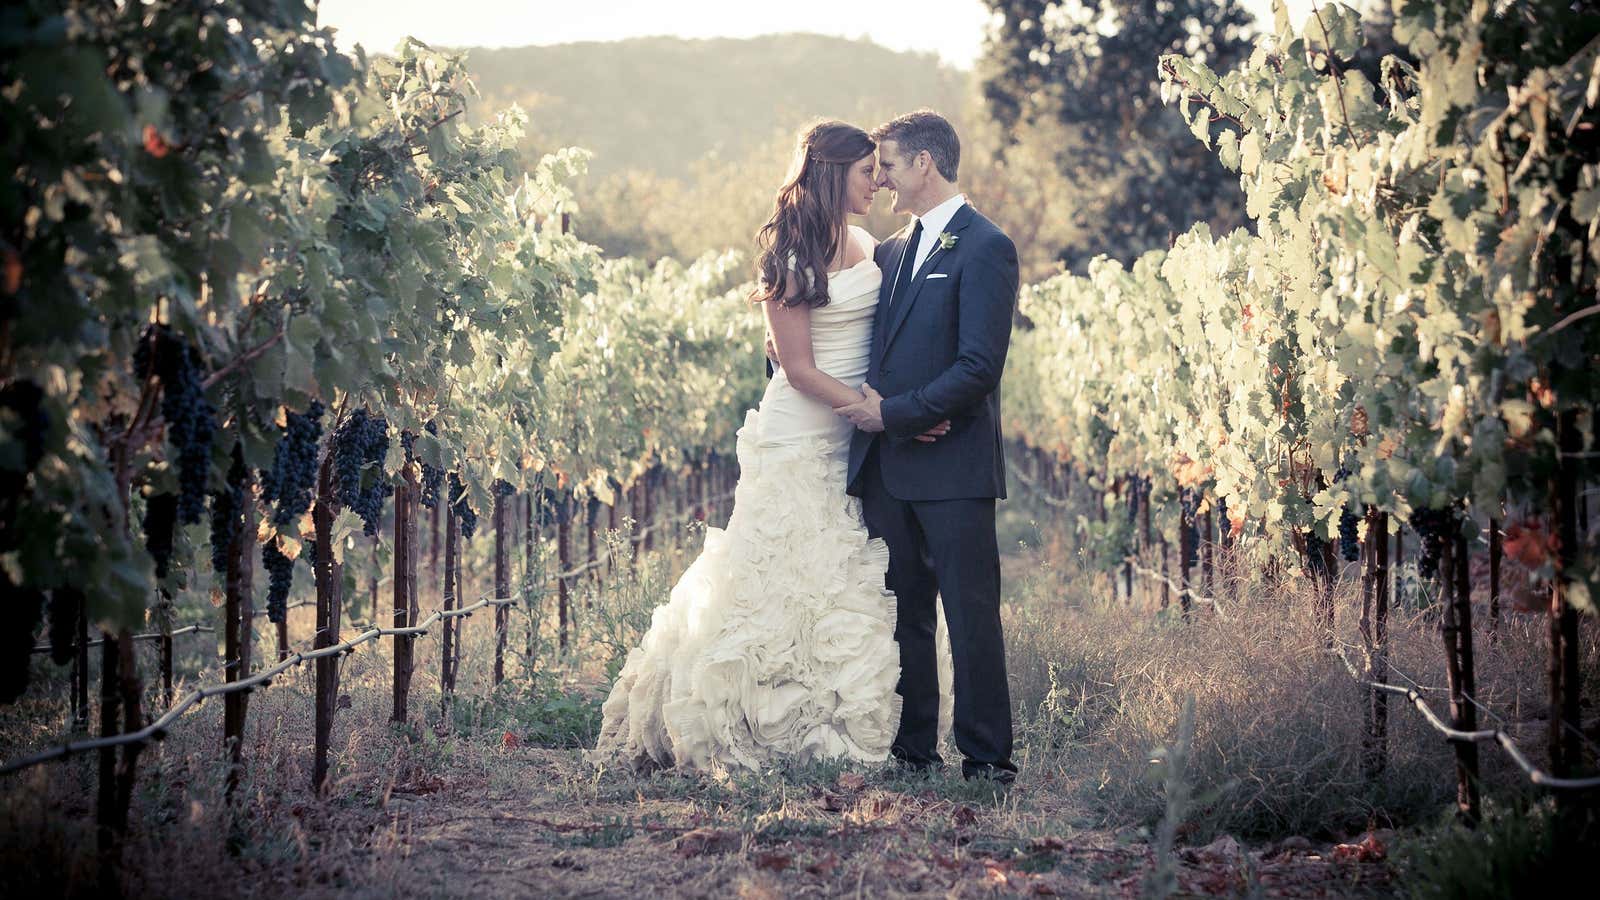 Death-with-dignity advocate Brittany Maynard had a voice.